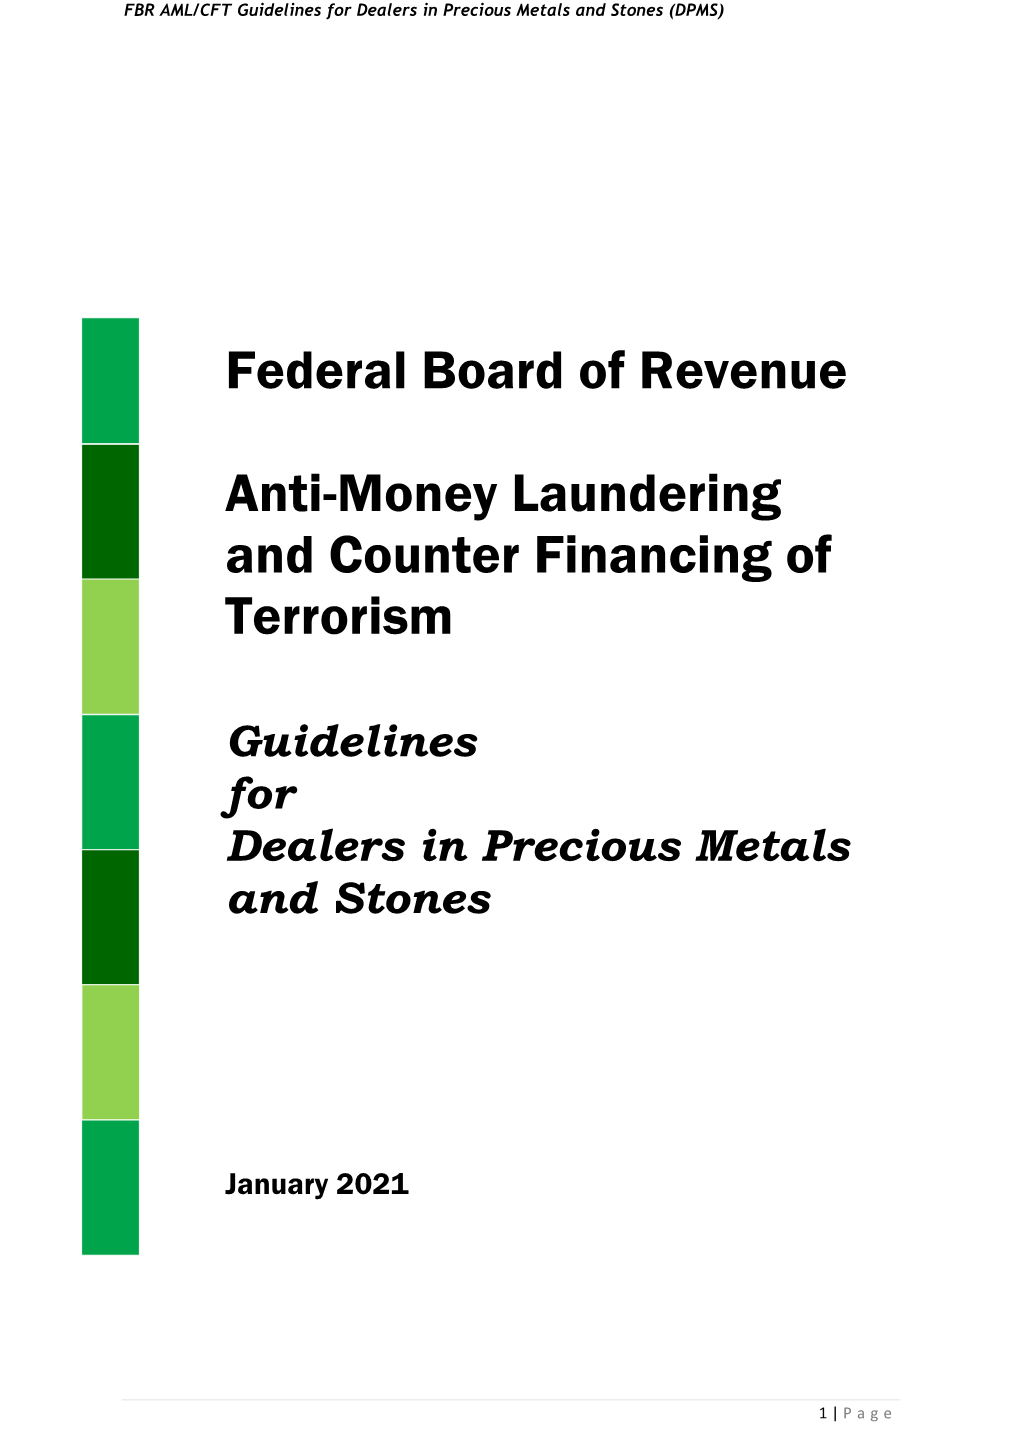 Federal Board of Revenue Anti-Money Laundering And